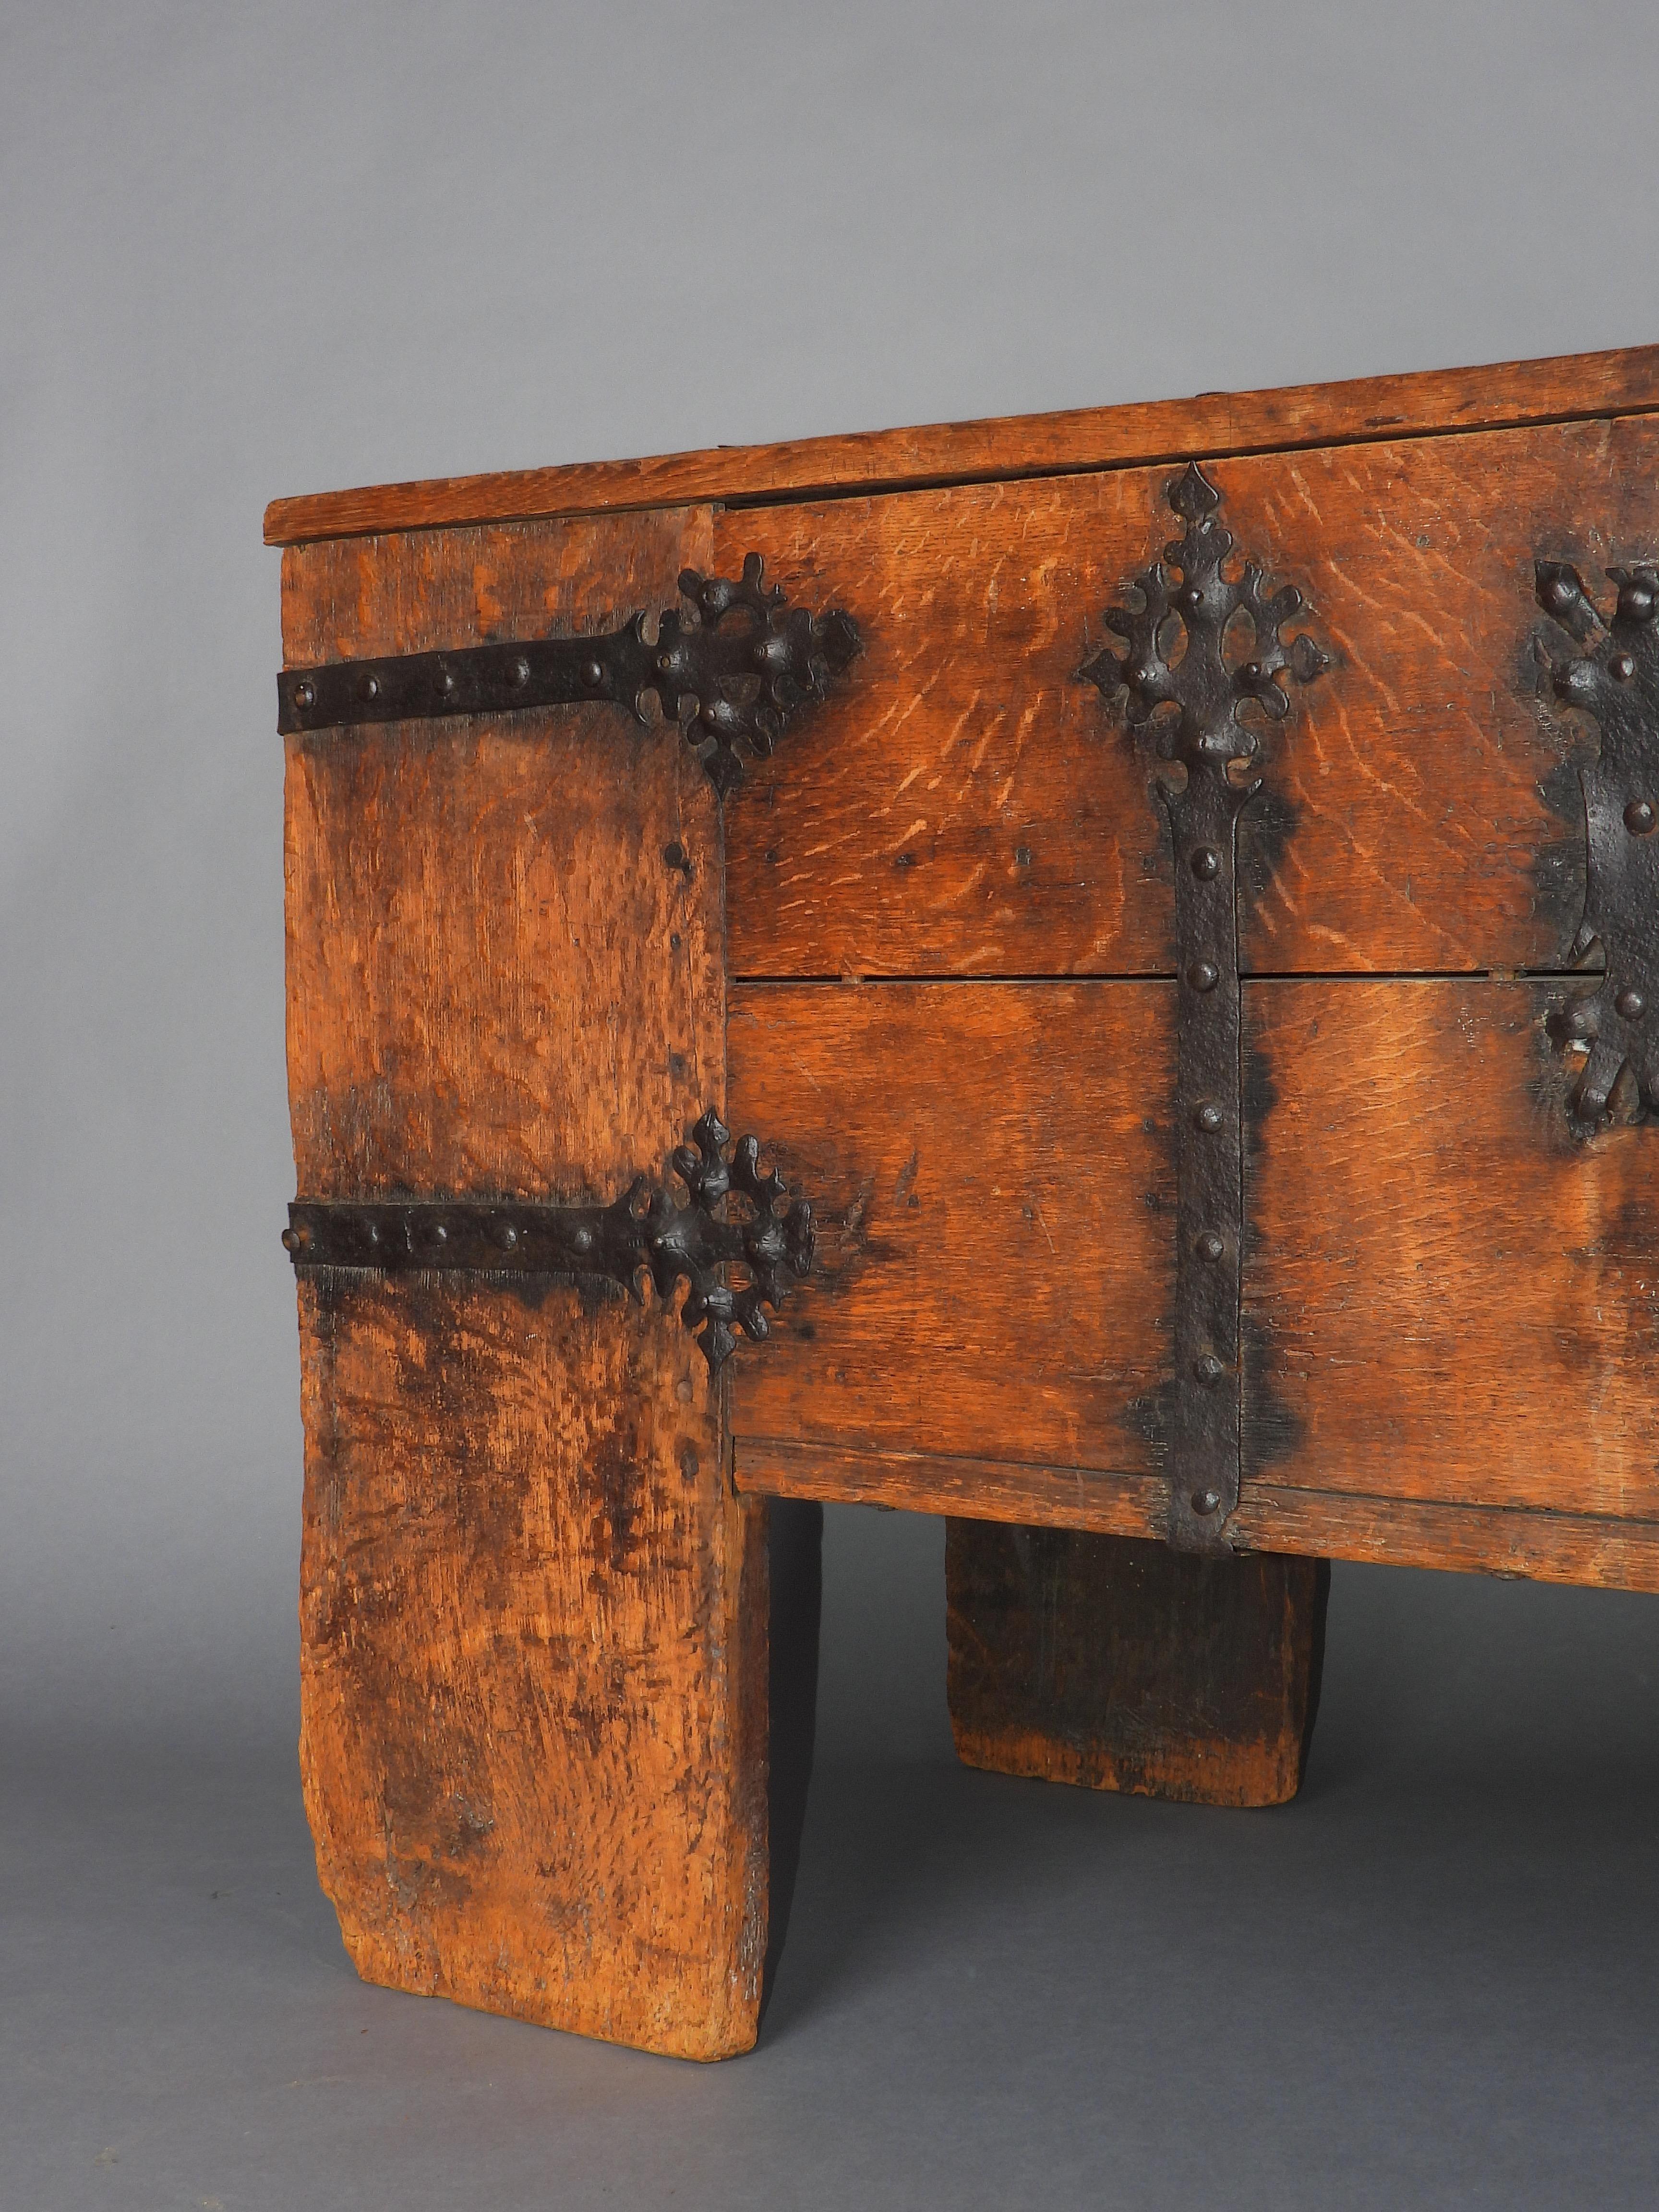 Rare Late Medieval 16th Century German Wrought Iron Oak Chest For Sale 9